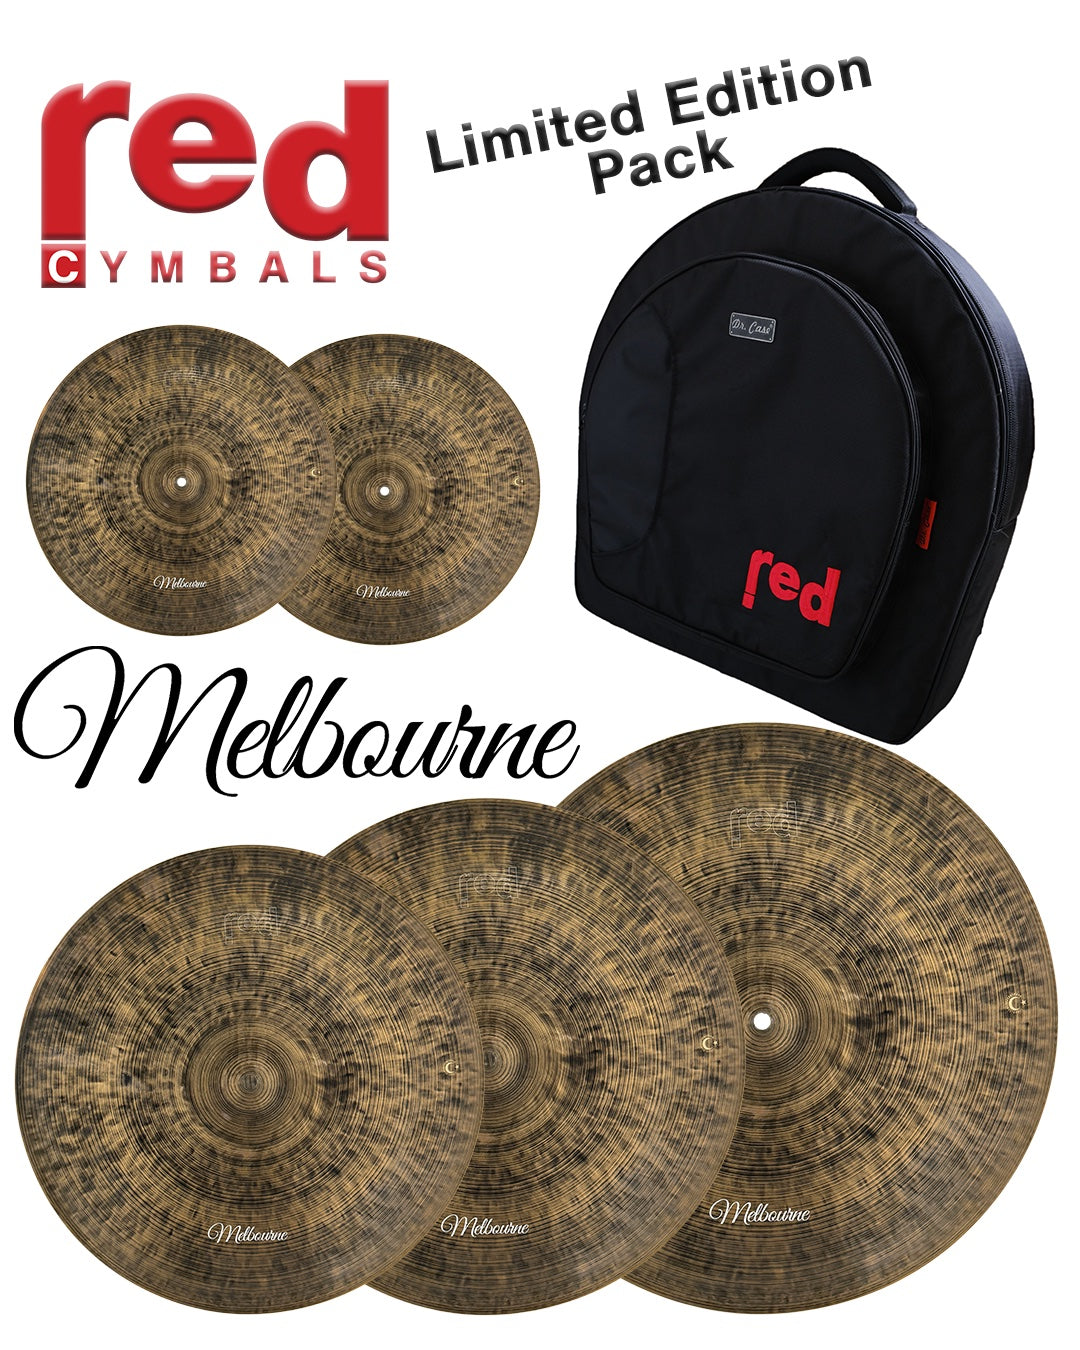 Limited Edition Cymbal Packs